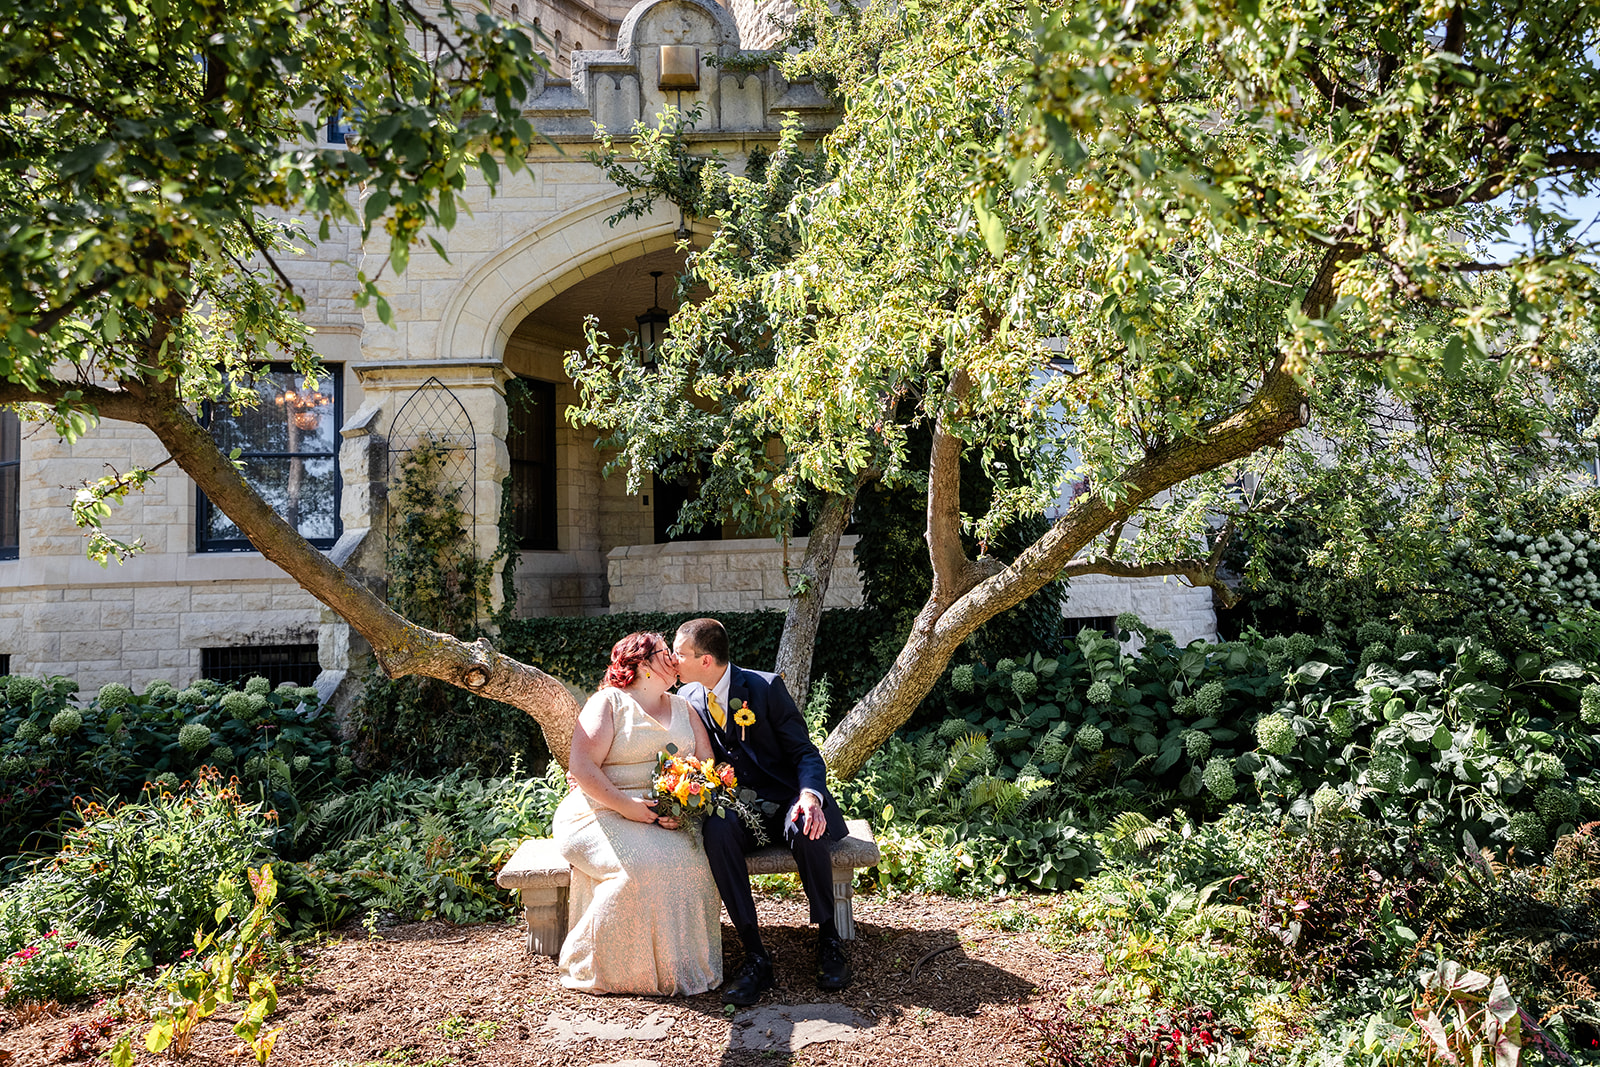 Angela and Mark sitting on a bench at Joslyn Castle